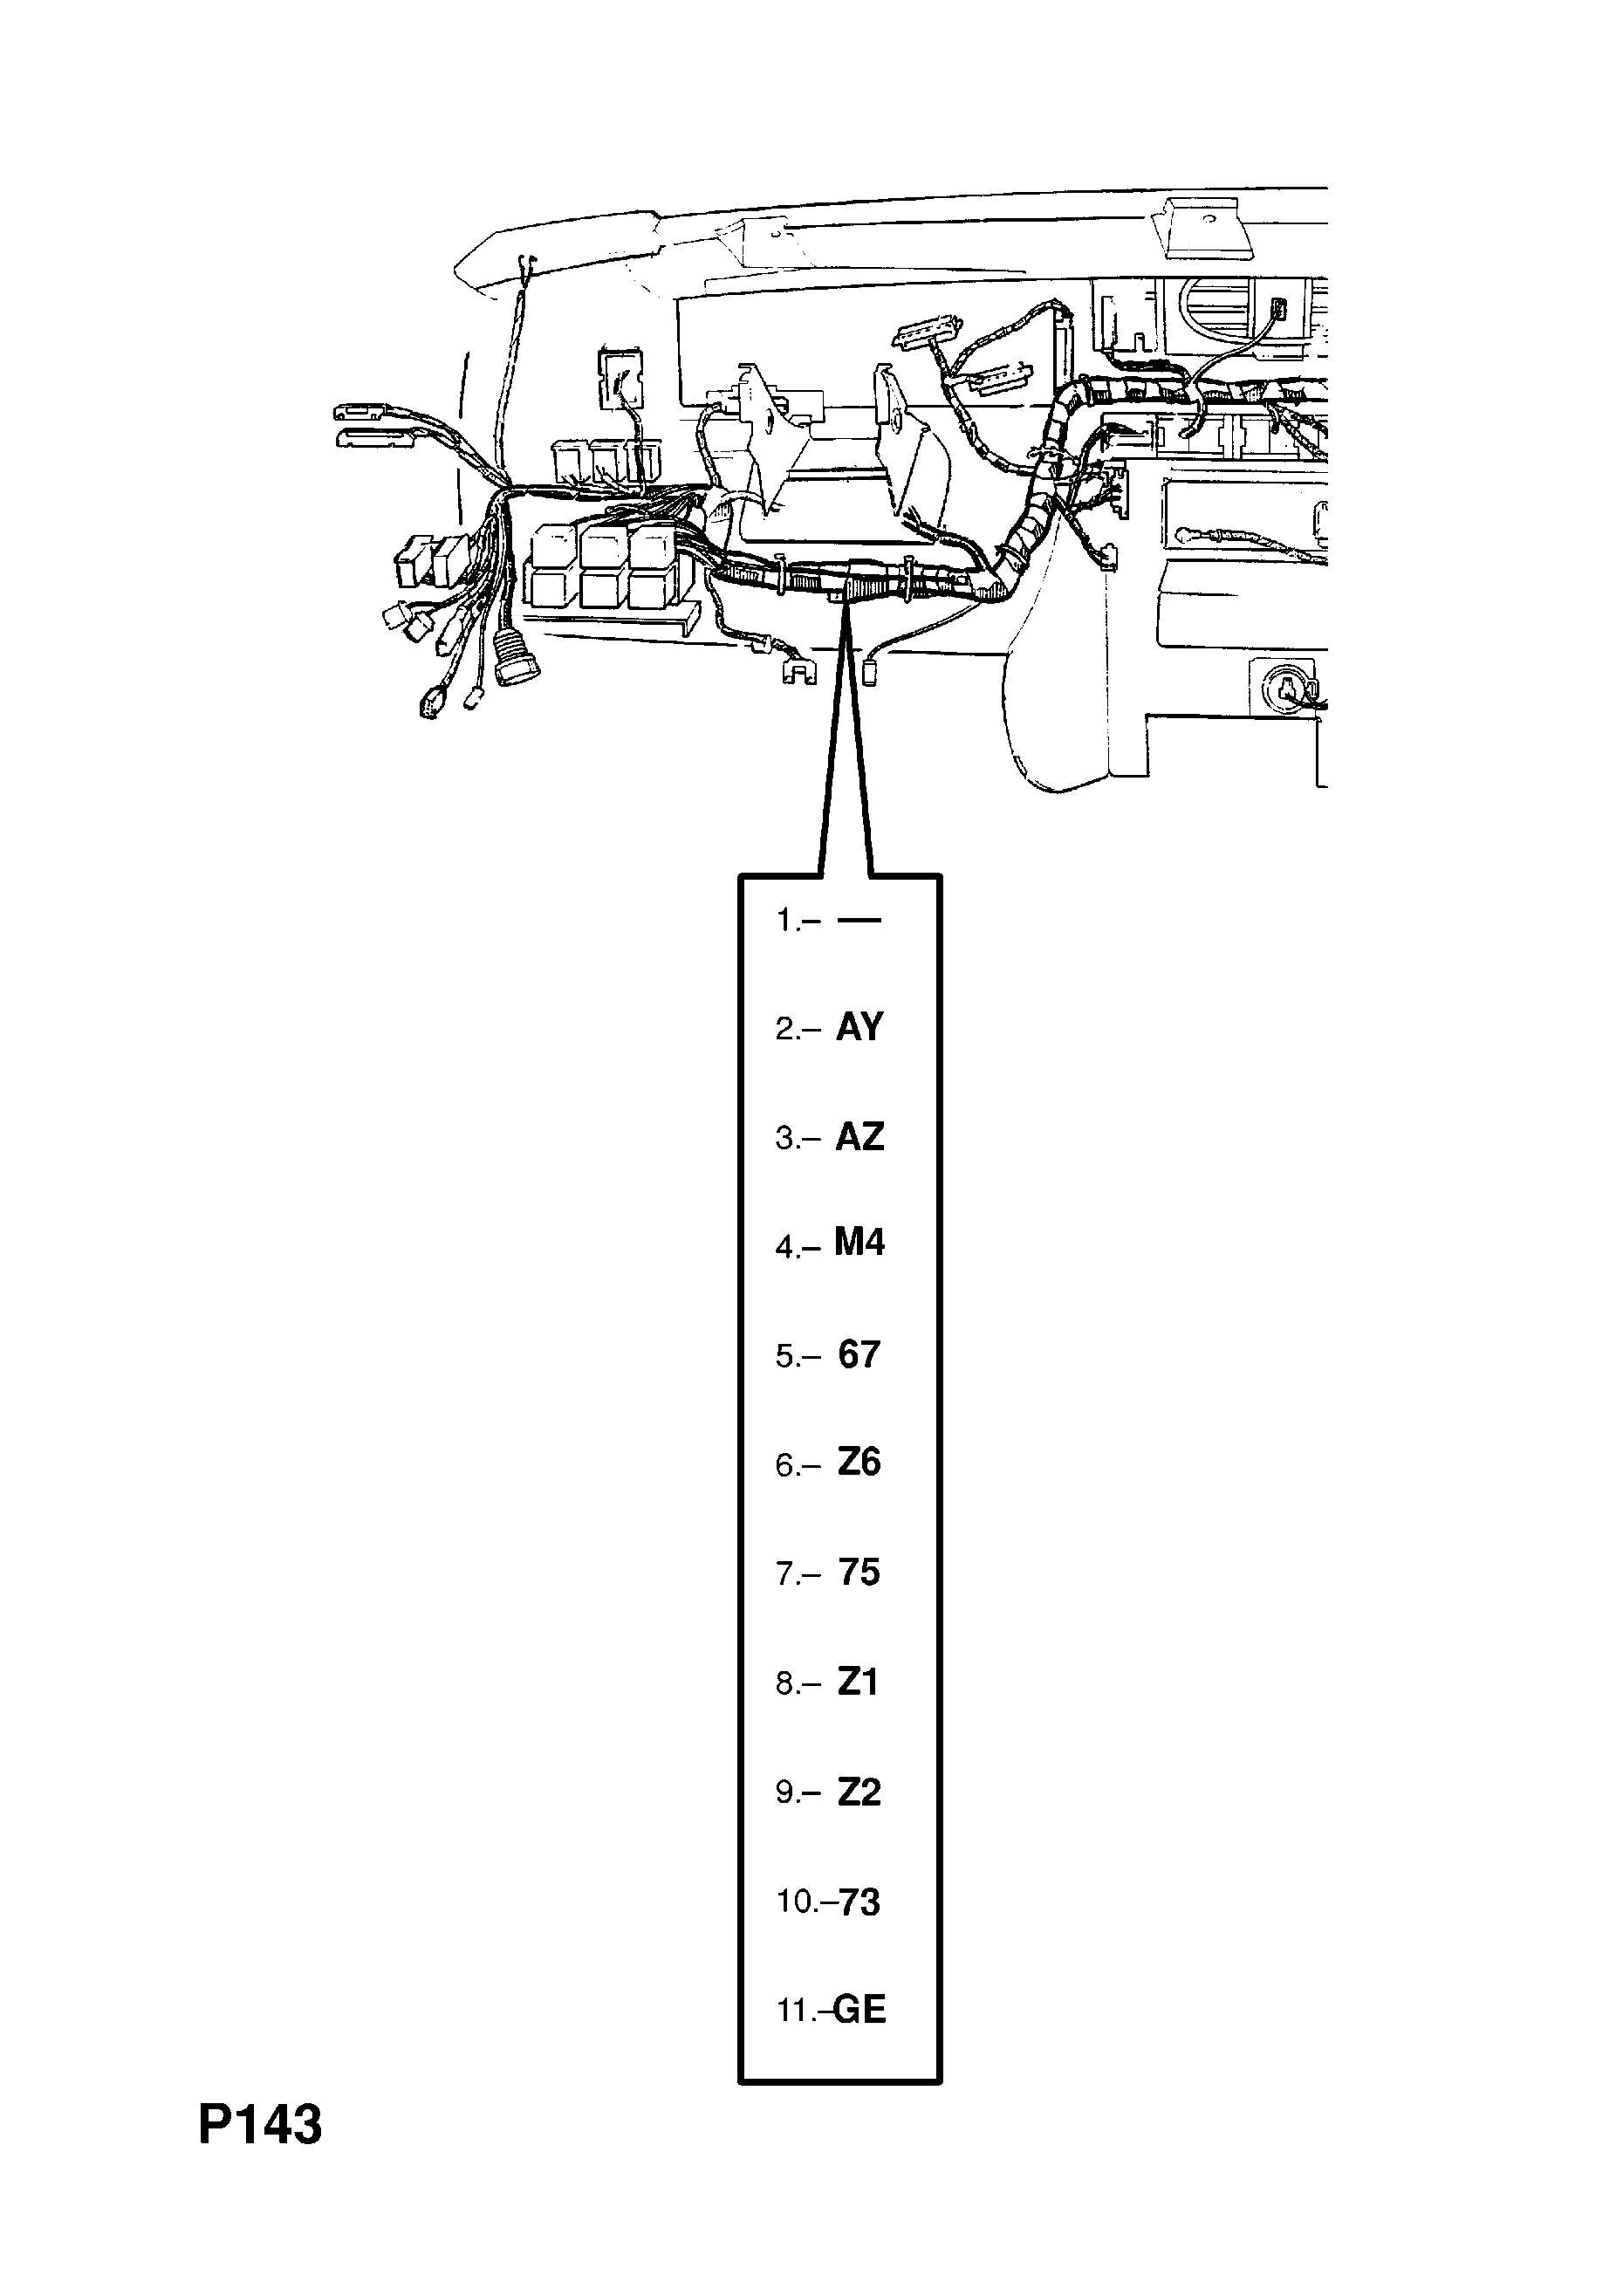 INSTRUMENT PANEL WIRING HARNESS (CONTD.) <small><i>[H1000001-L1999999 FOR AIR CONDITIONING AND AUTOMATIC TRANSMISSION AND LCD INSTRUMENTS (CONTD.)]</i></small>